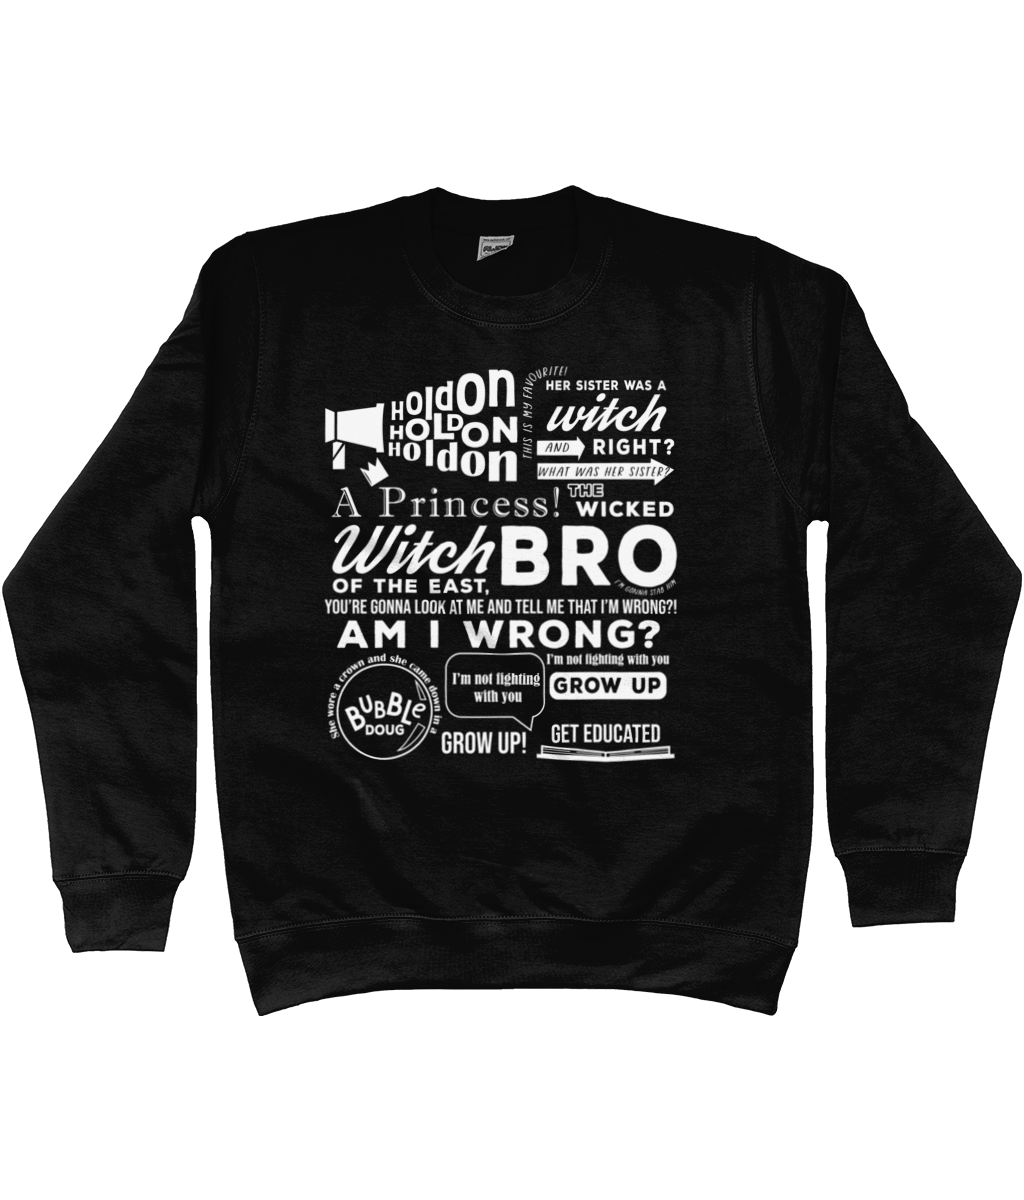 The Wicked Witch of the East Bro Sweatshirt